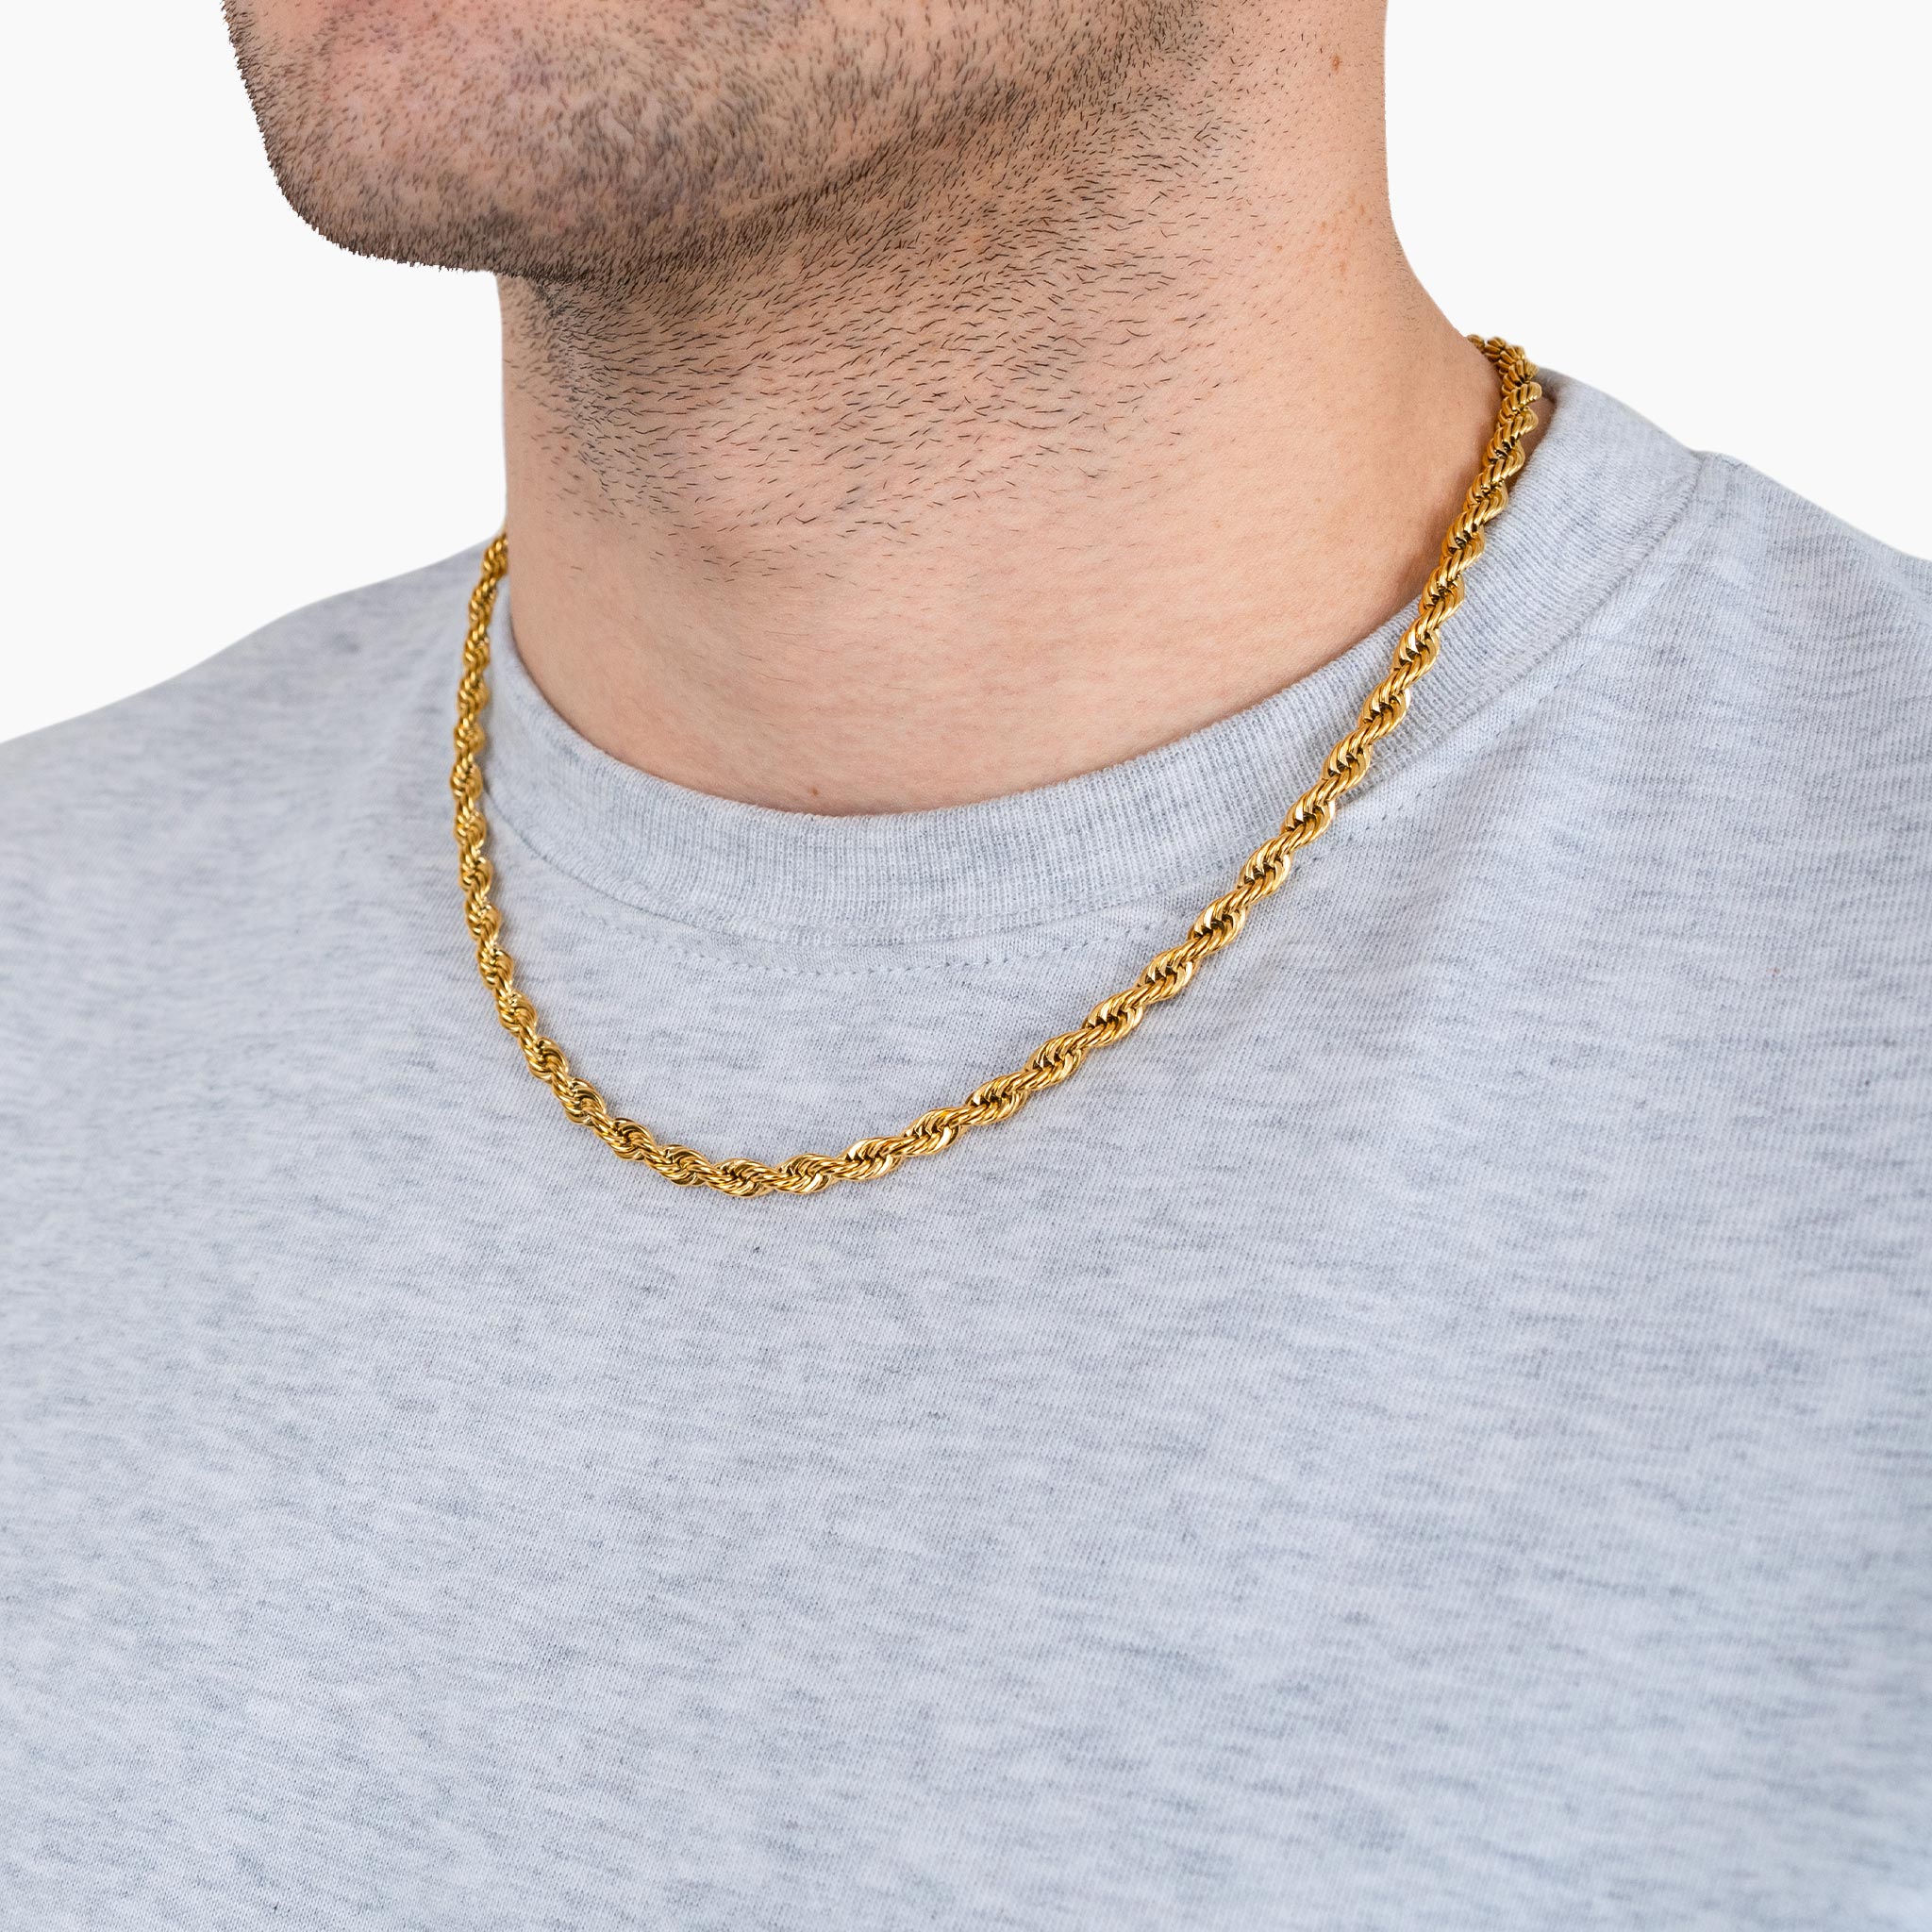 5mm Twisted Rope Chain - Gold